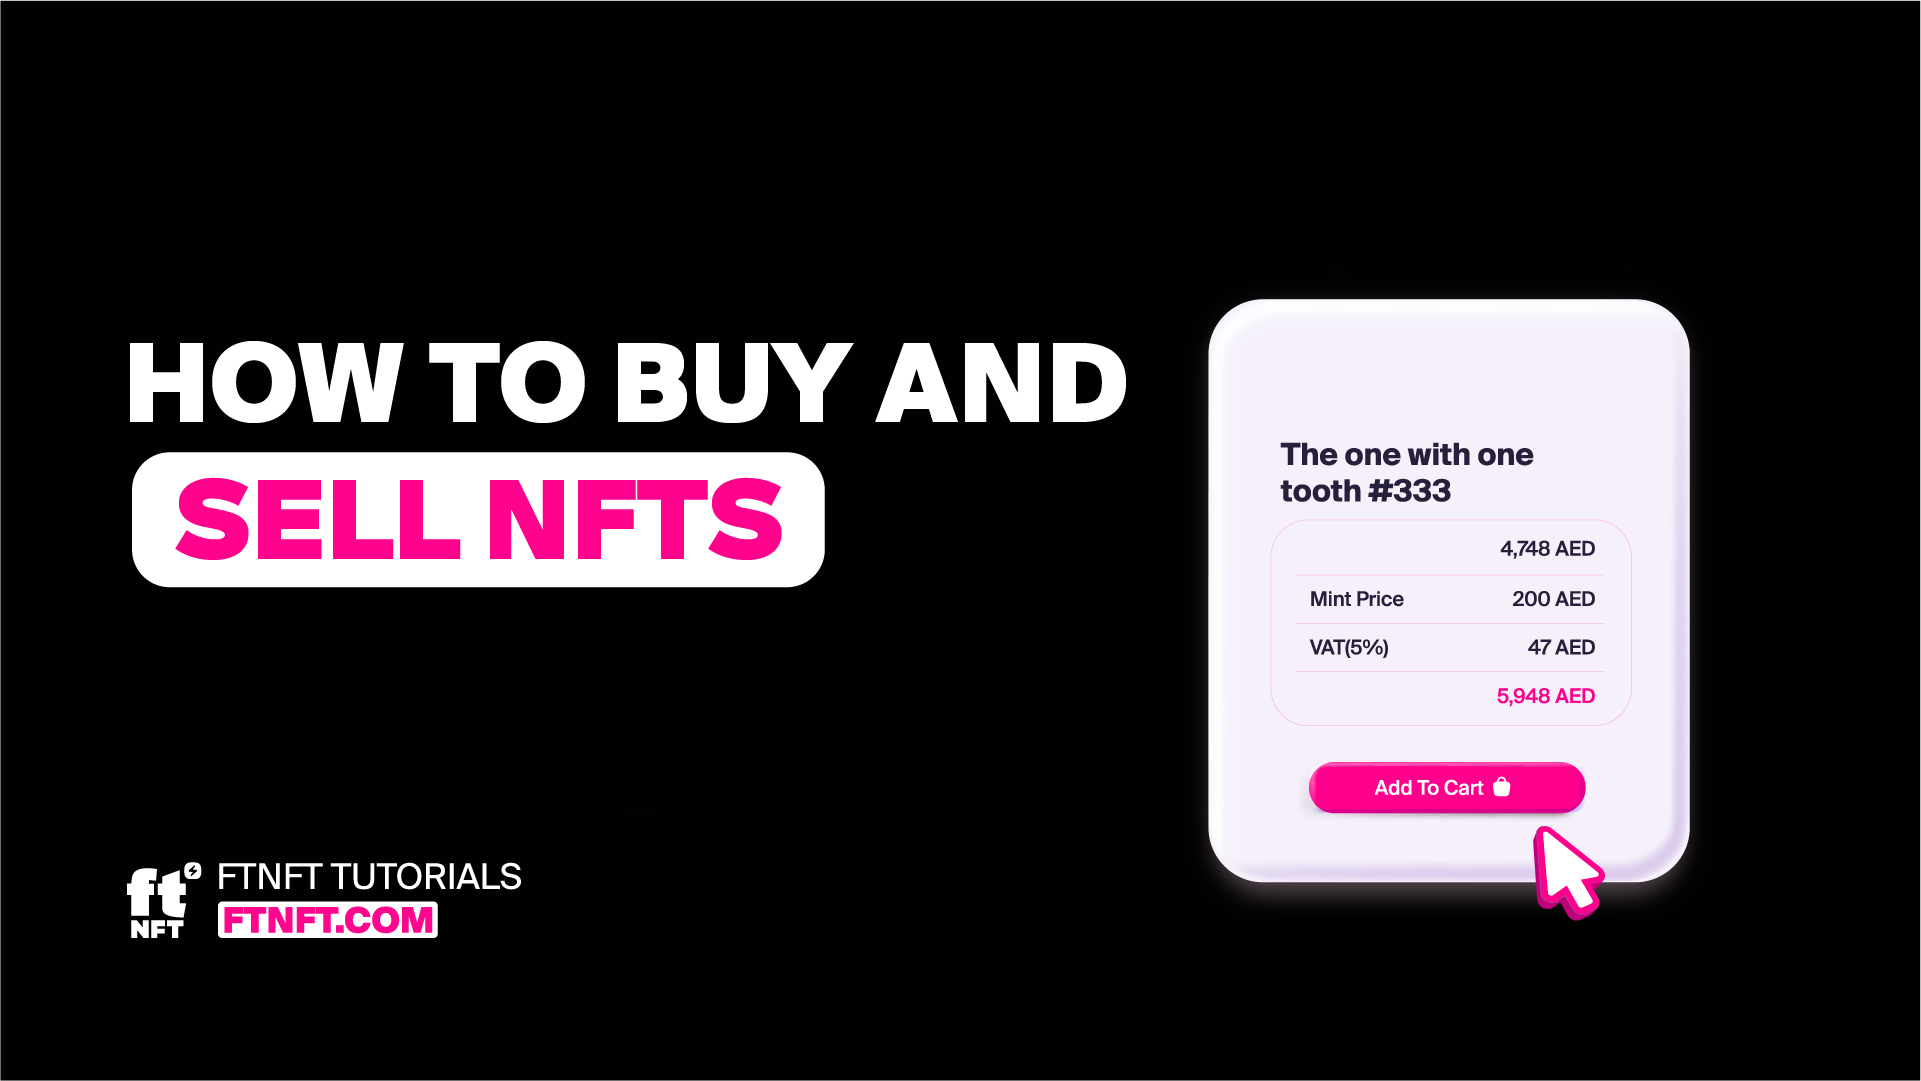 869-how-to-buy-and-sell-nfts-16910538255936.png